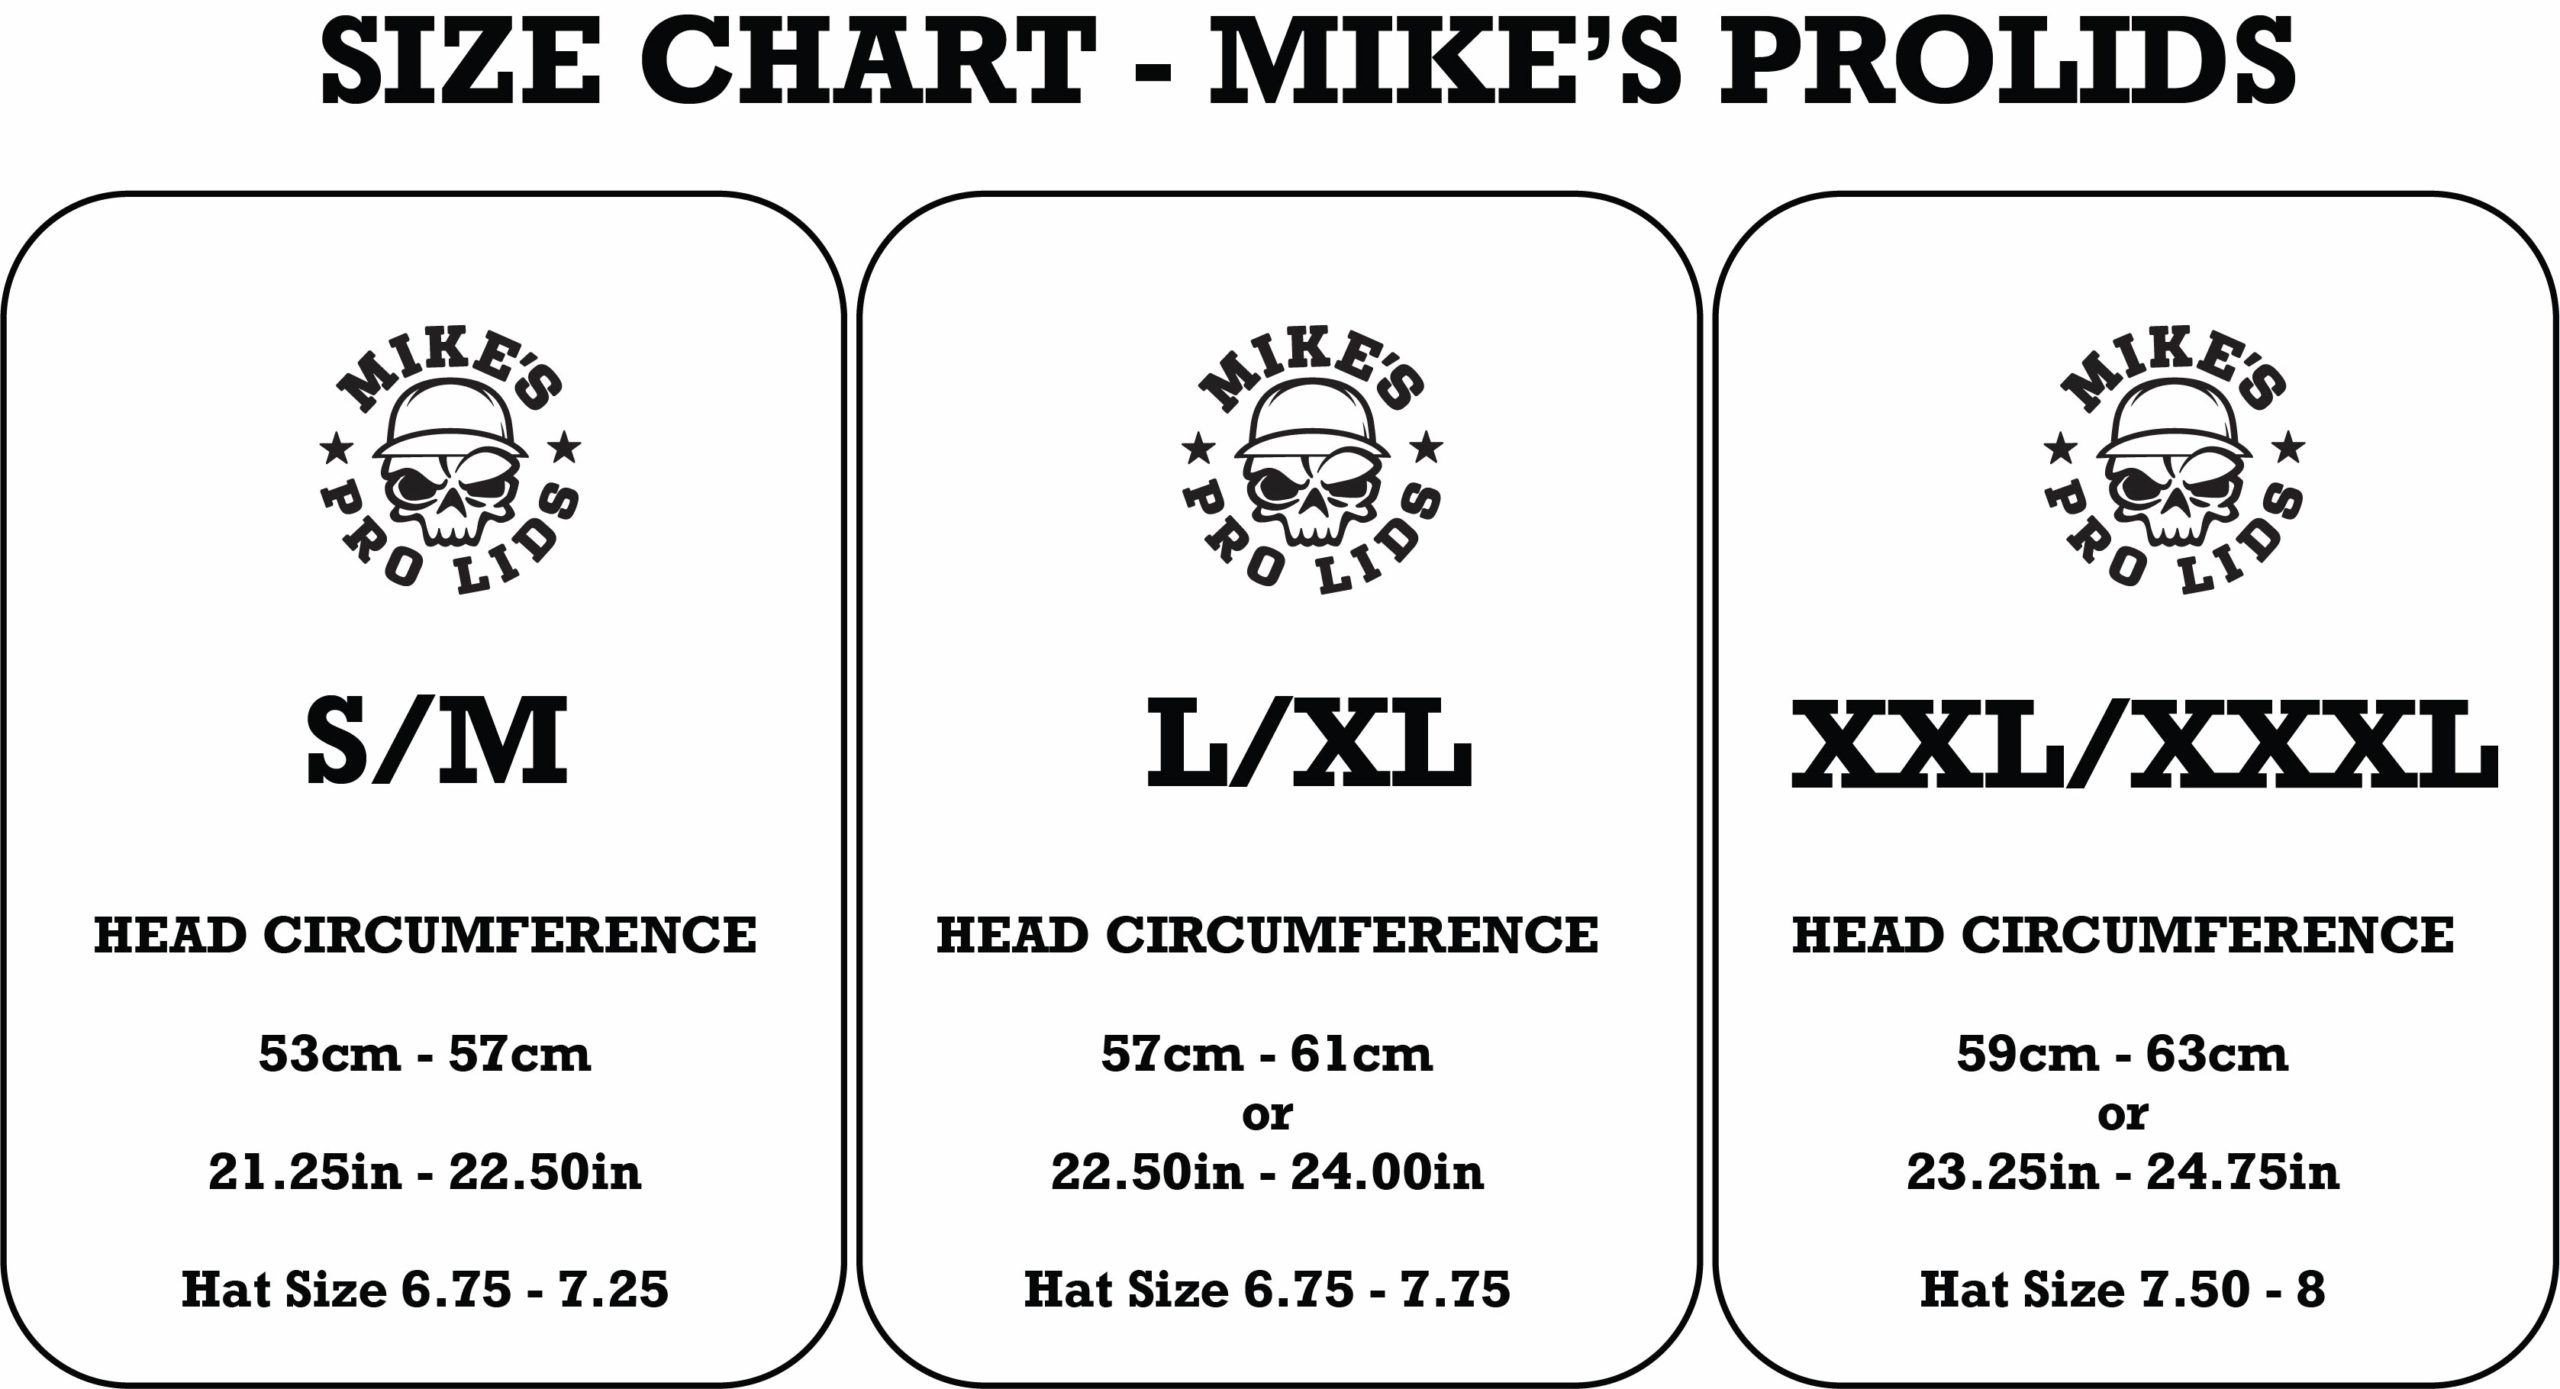 This Mikes Pro Lids sizing chart can help you determine which size liner will work for you so you get the perfect fitting lid you deserve. Motorcycle Helmet | Custom Motorcycle helmet | Mikes Pro Lids Sizing | What Size Helmet Should I Wear | Custom Motorcycle | Motorcycle Riding Tips #motorcyclehelmet #mikesprolids